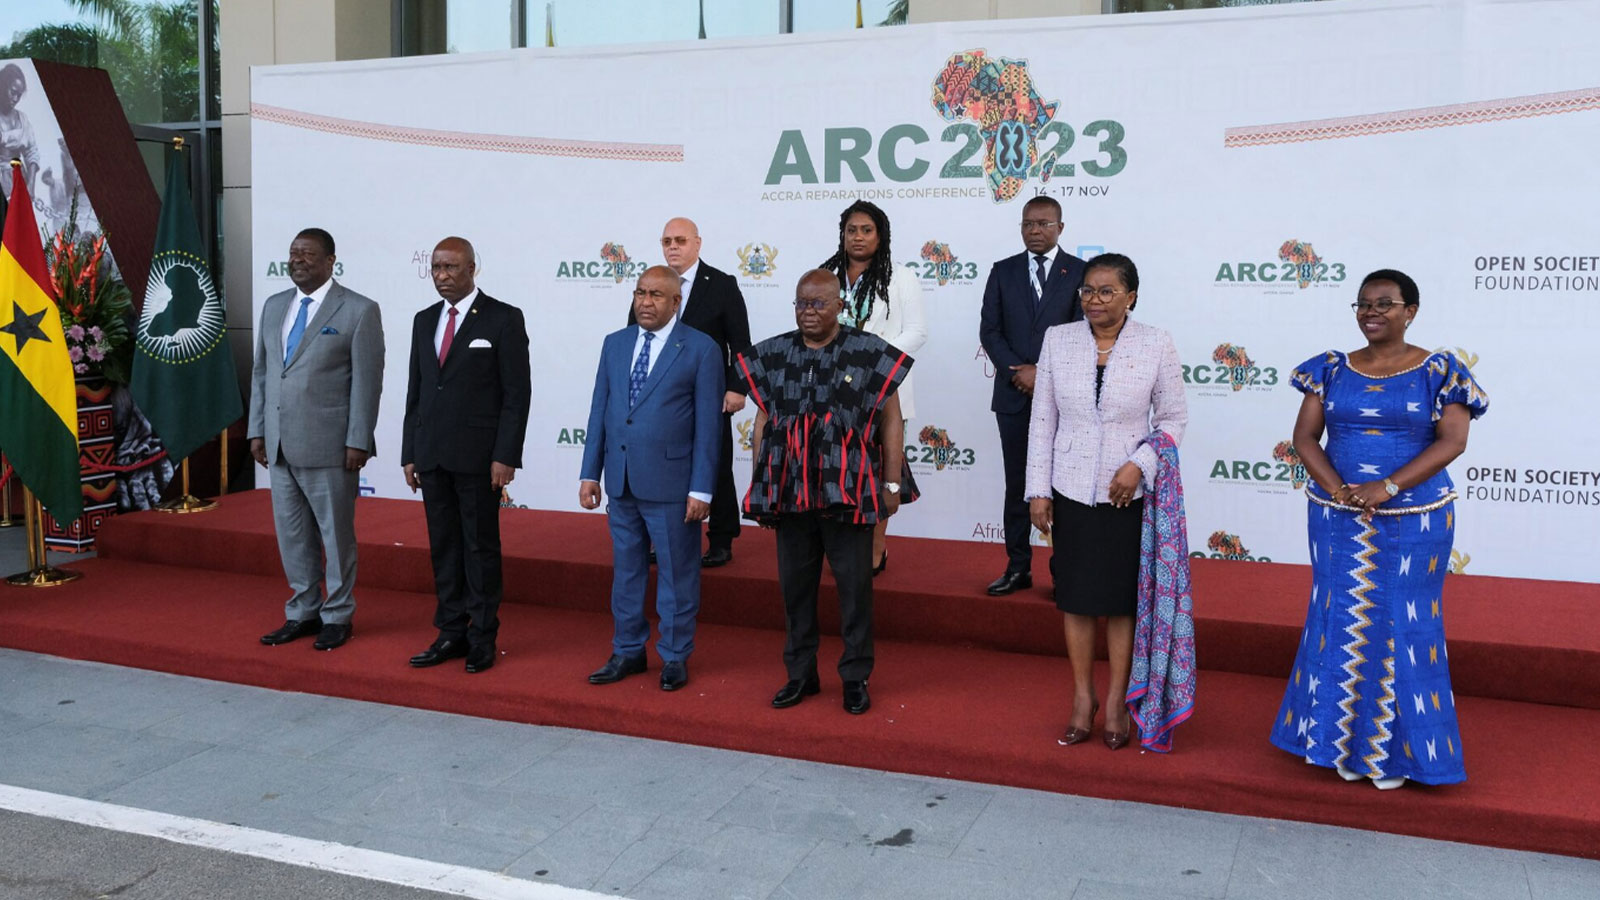 Ghana's president, Nana Akufo-Addo poses for a group photo with African leaders during the opening event of the African Union's conference on reparations in Accra, Ghana November 14, 2023. 